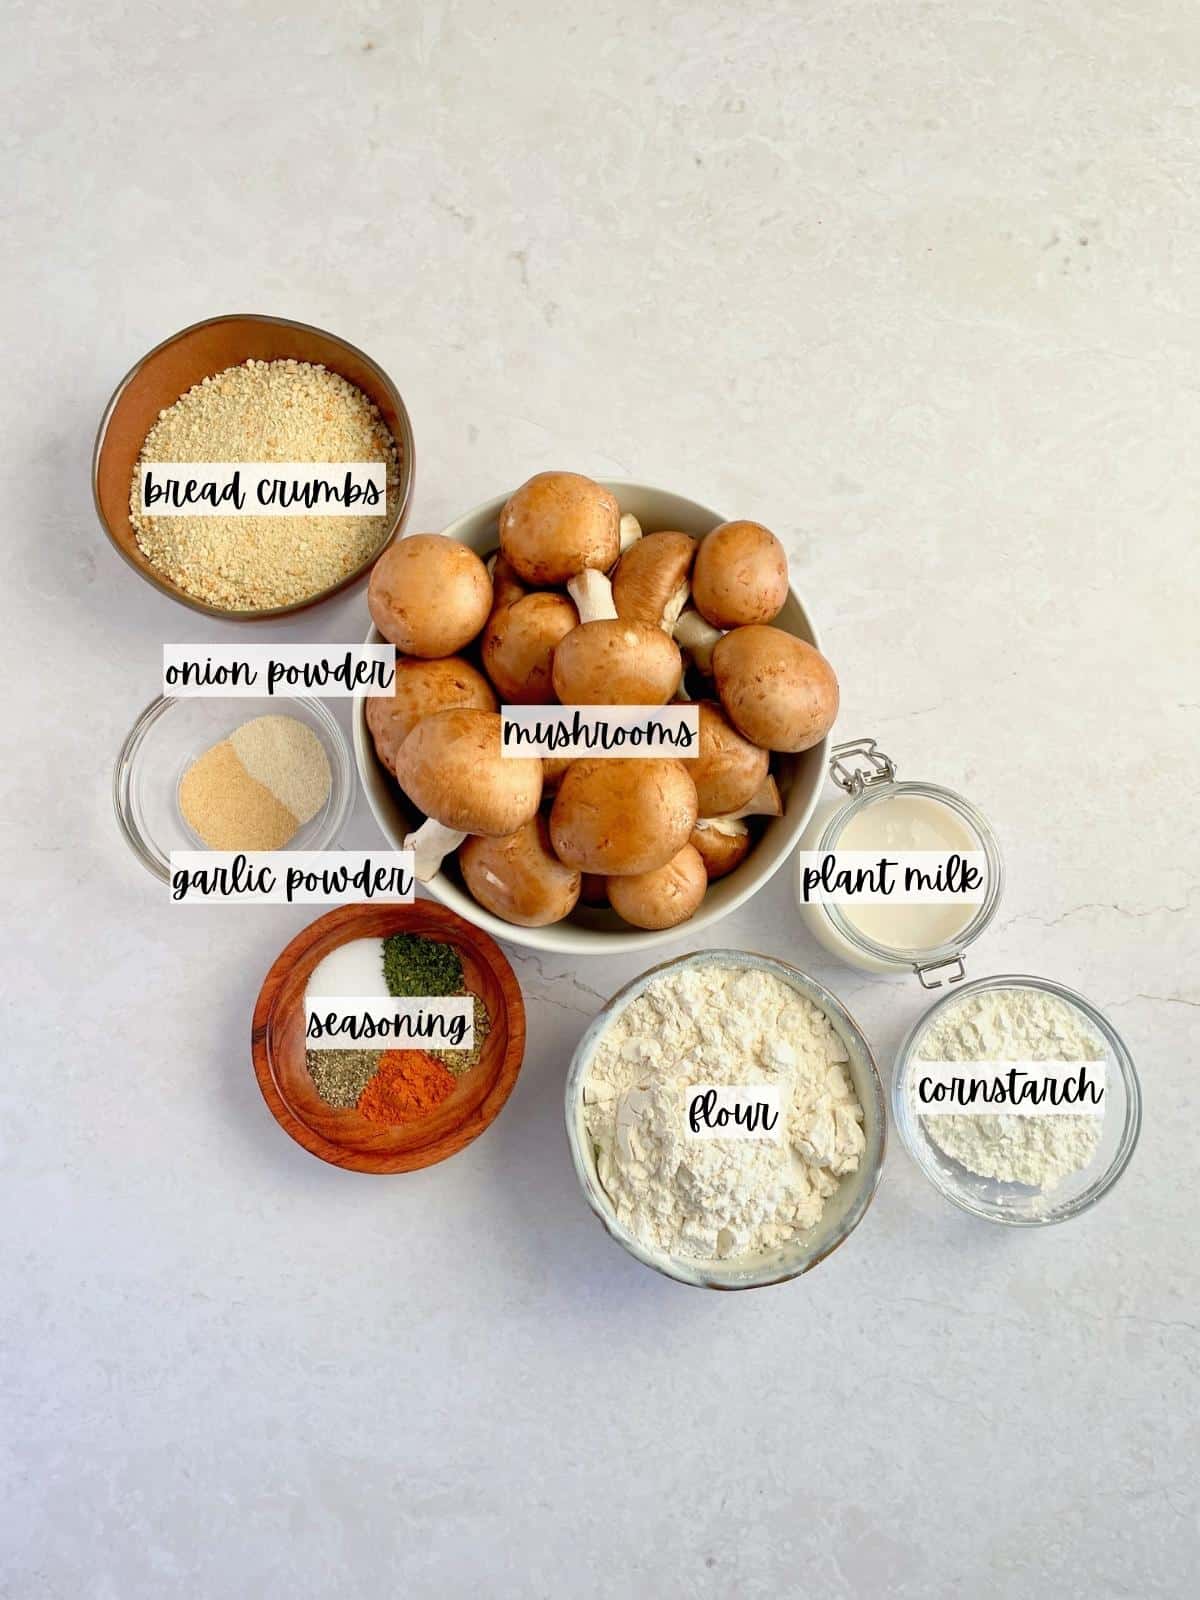 Labeled ingredients for breaded mushrooms.